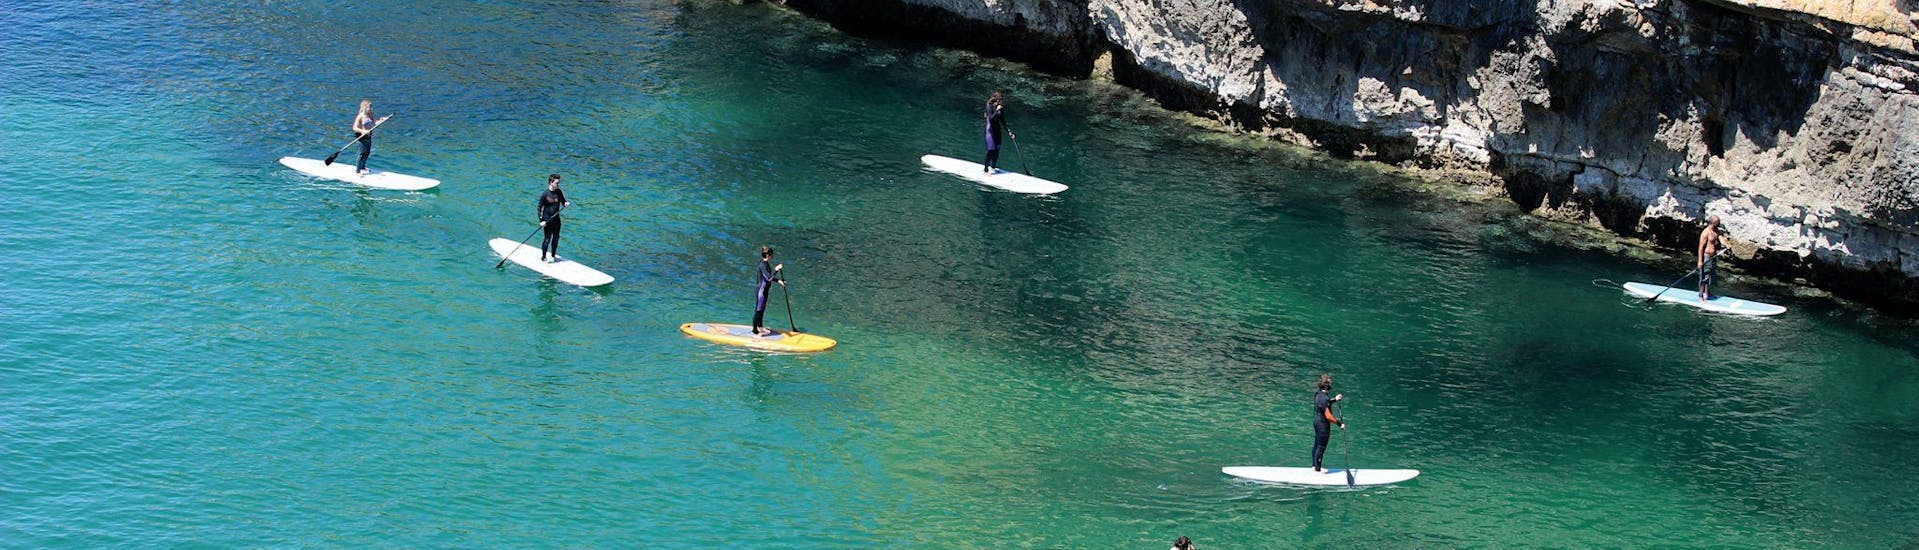 SUP Tour of the Caves and Cliffs near Sagres with Algarve SUP Tours - Hero image